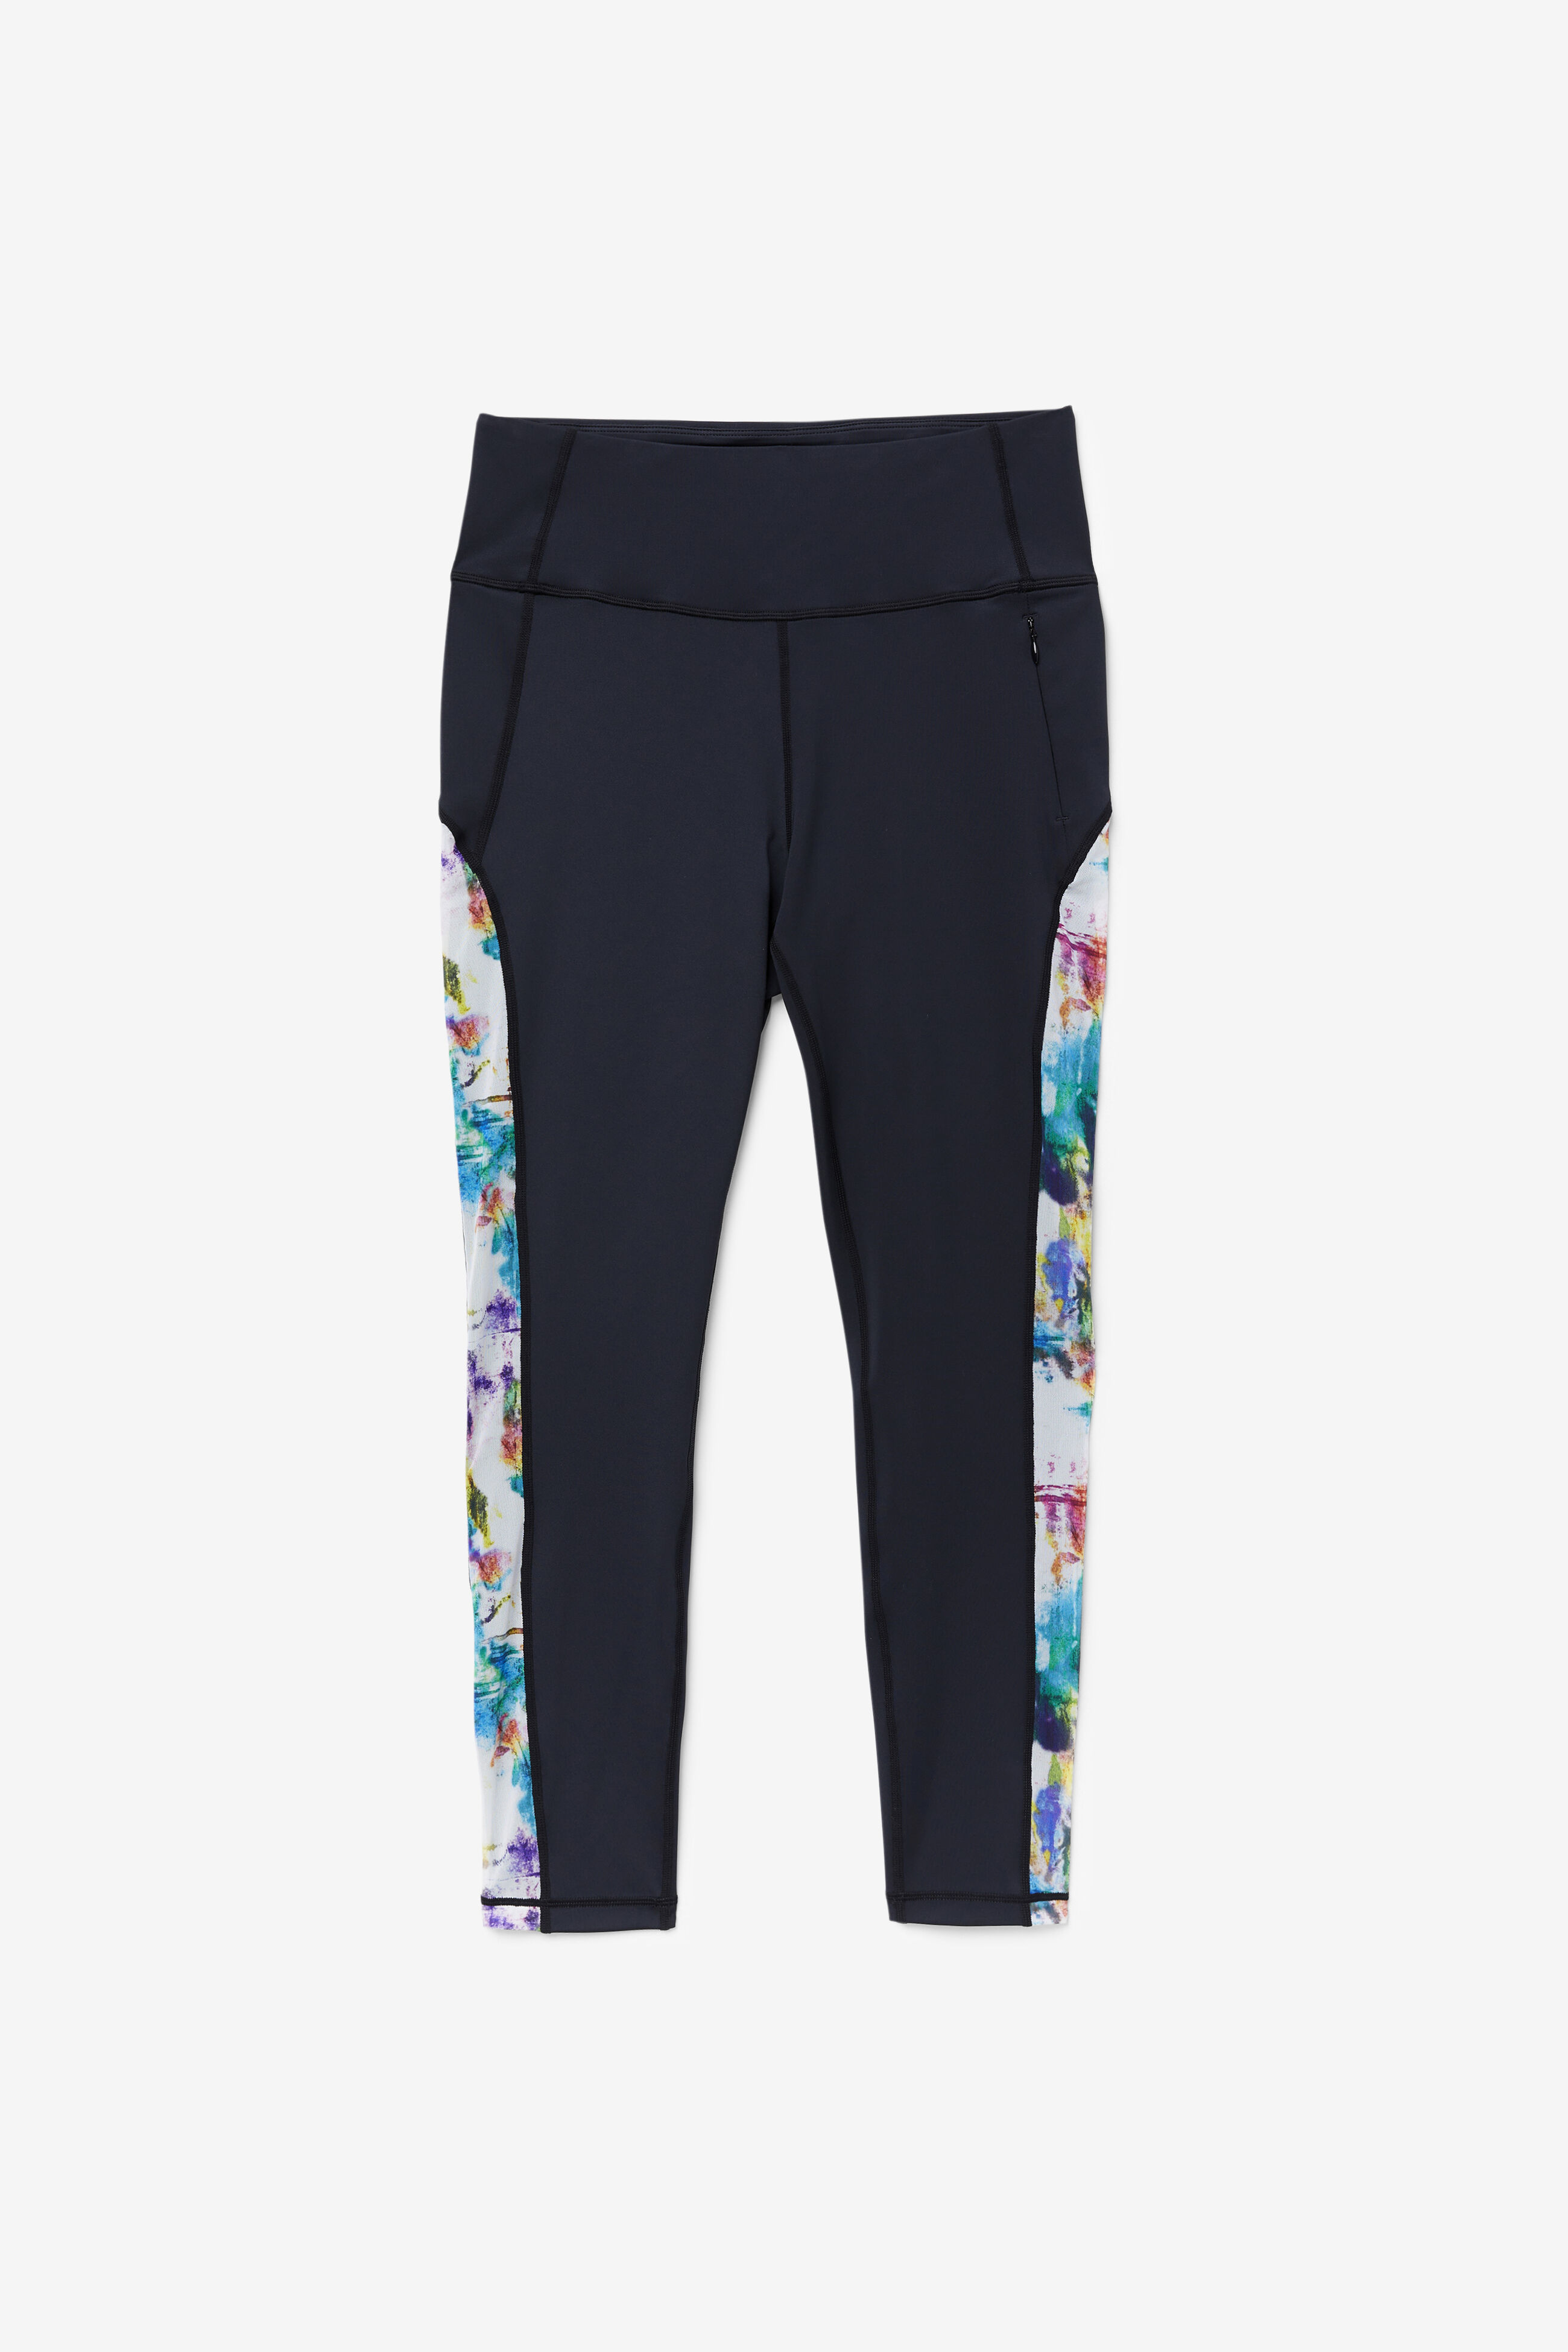 Forza Contrast 7/8 High Waisted Working Leggings | Fila FW119462